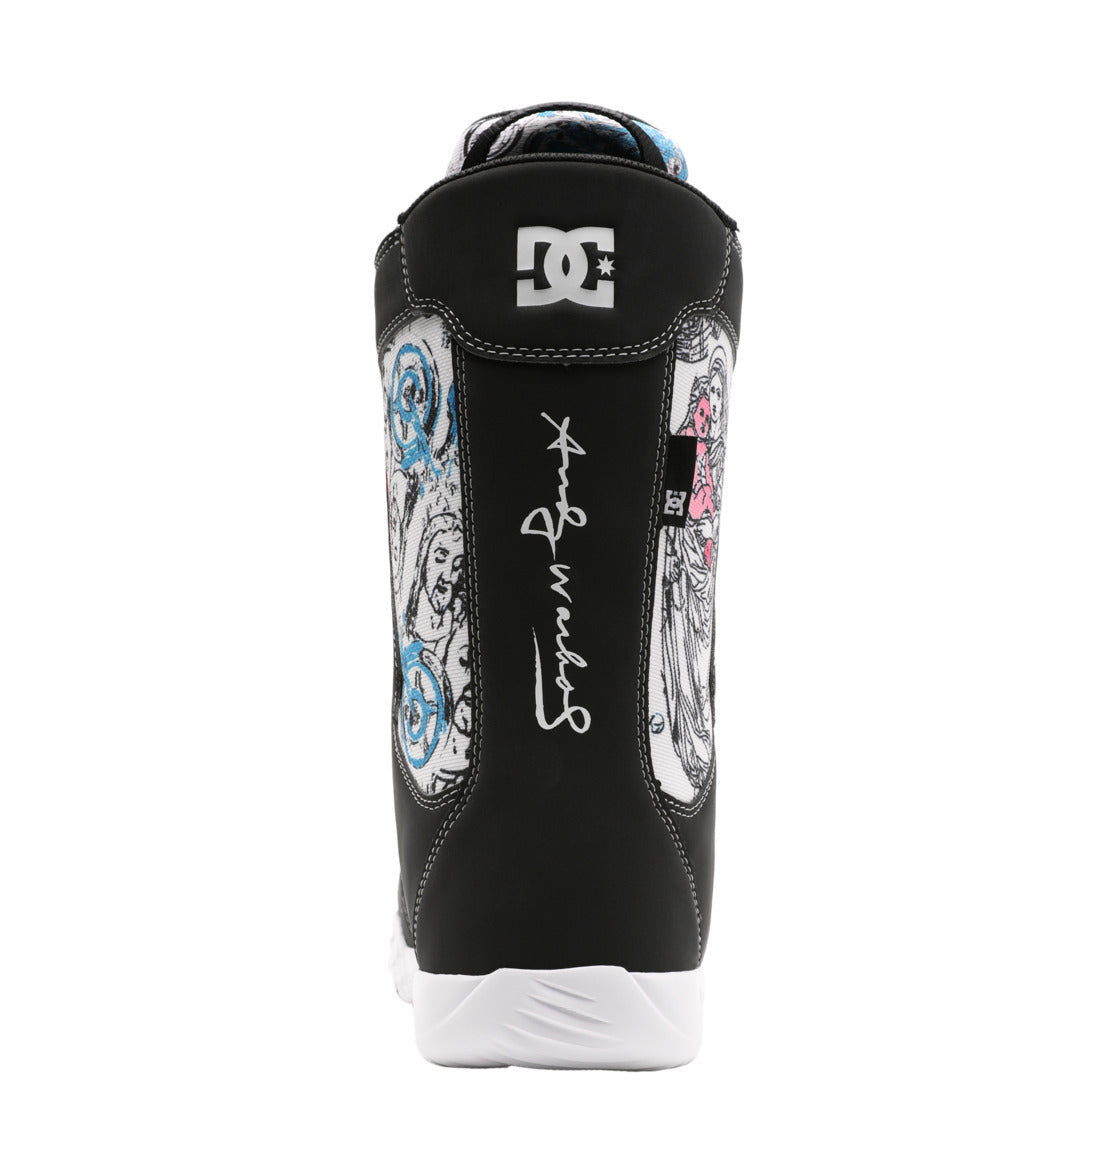 Men's Andy Warhol x DC Shoes Phase BOA® Snowboard Boots - DC Shoes